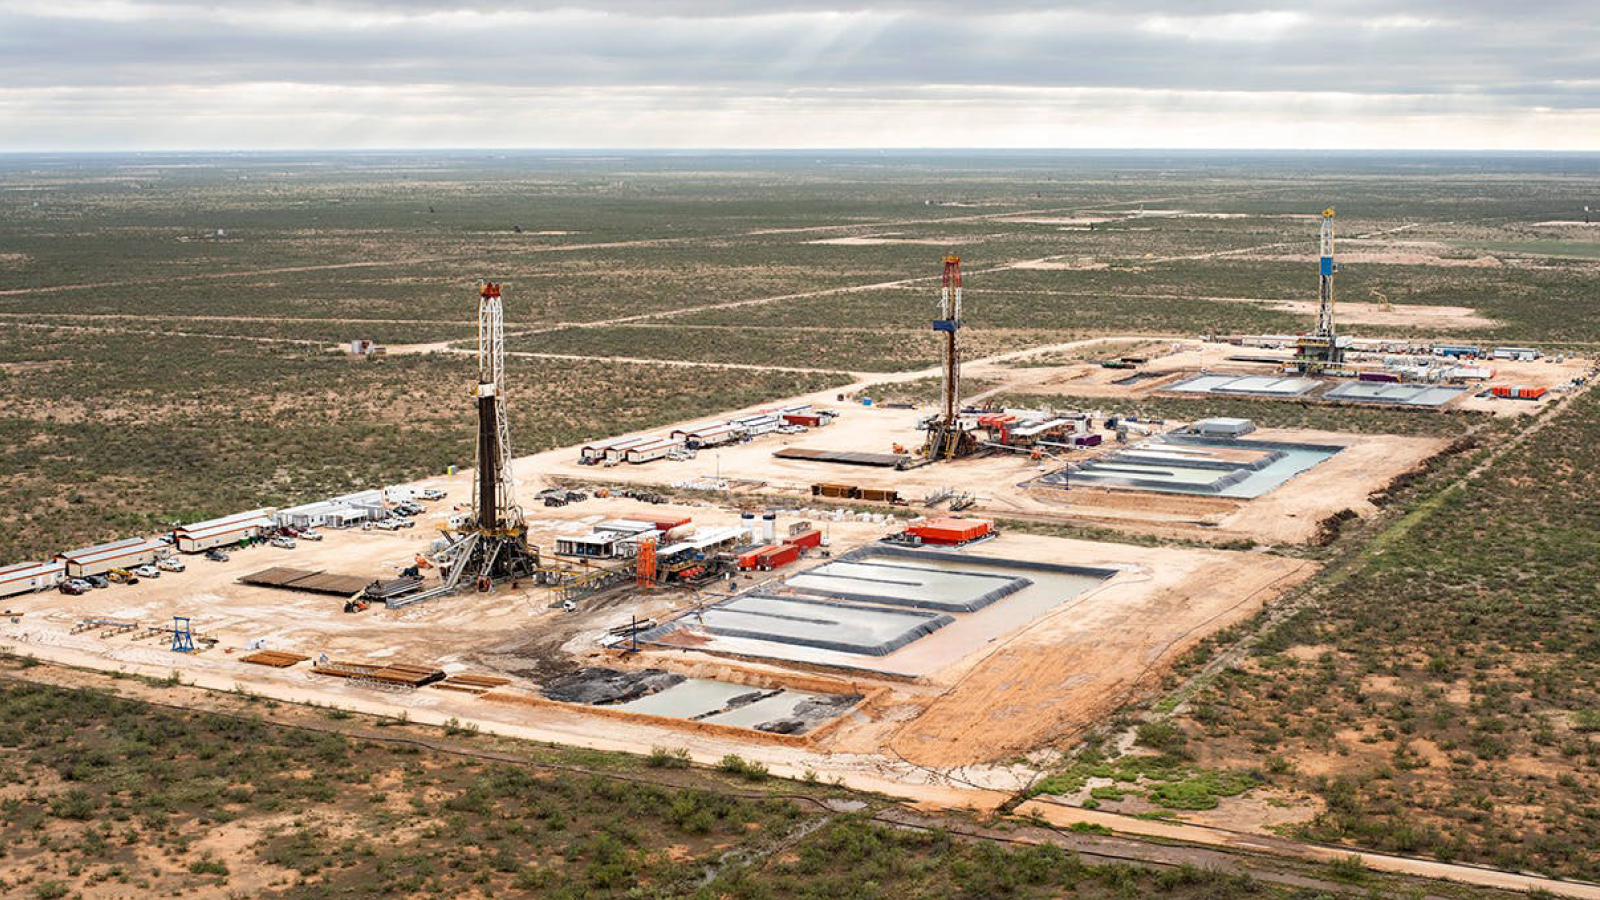 Permian Lodging bolsters oil and gas production in West Texas by supporting major energy ventures in the Permian Basin